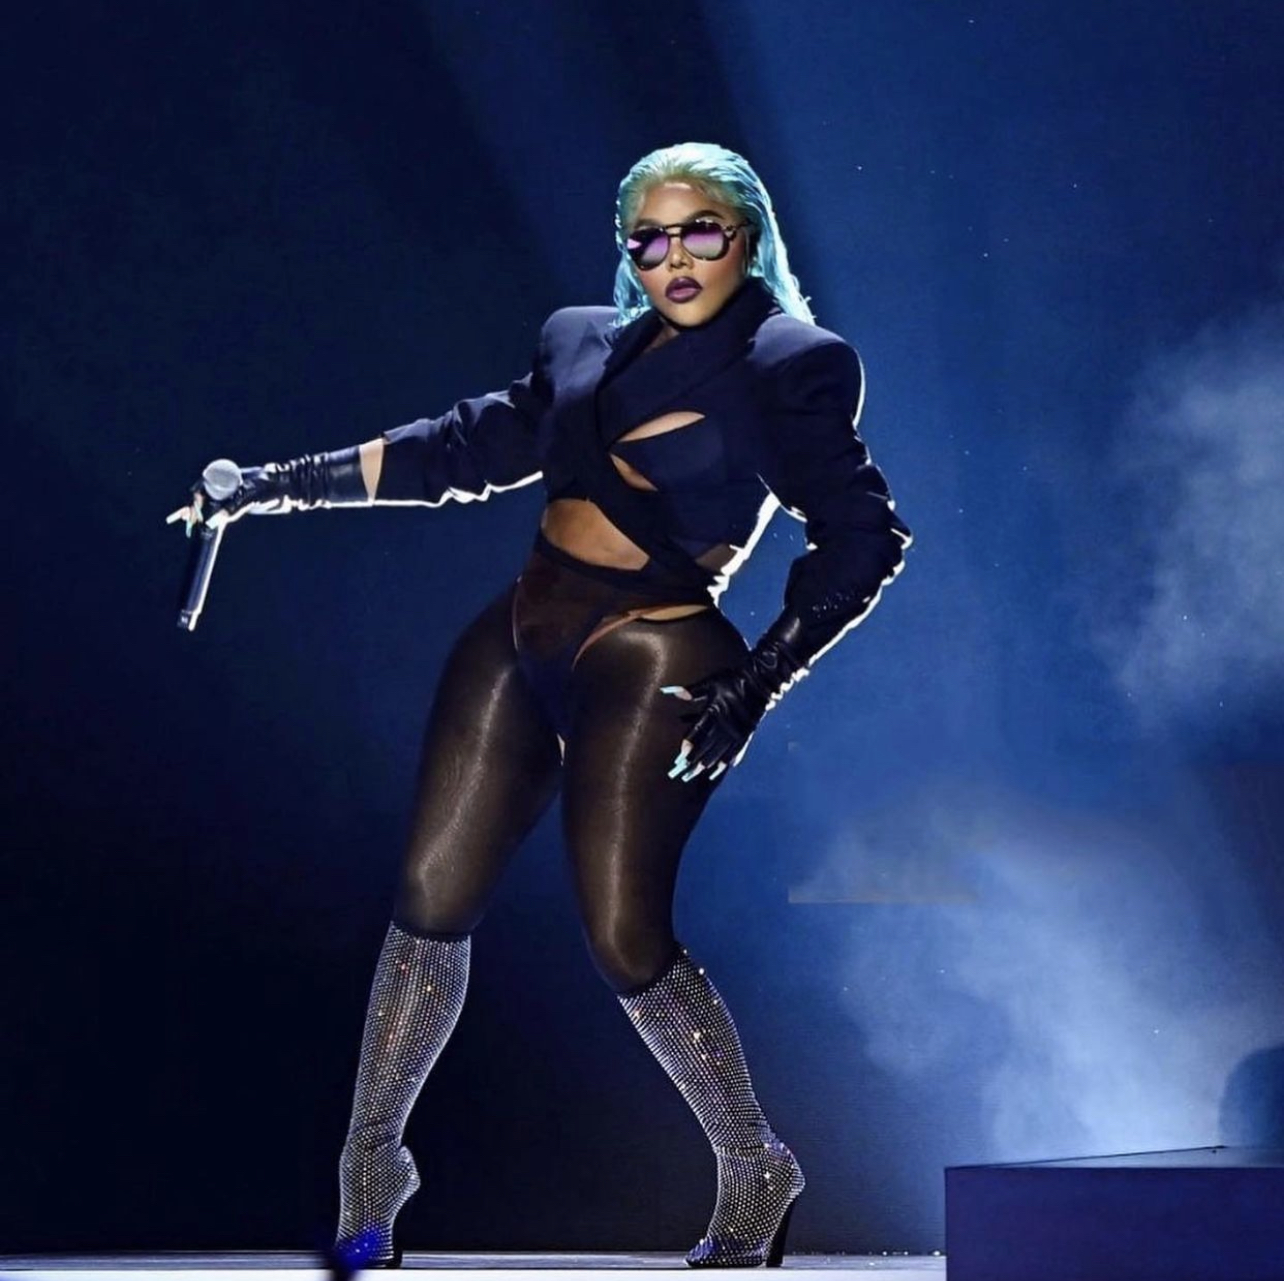 Lil Kims Viral Bet Awards 2022 Performance In Cutout Blazer Bodysuit And Bedazzled Knee High 